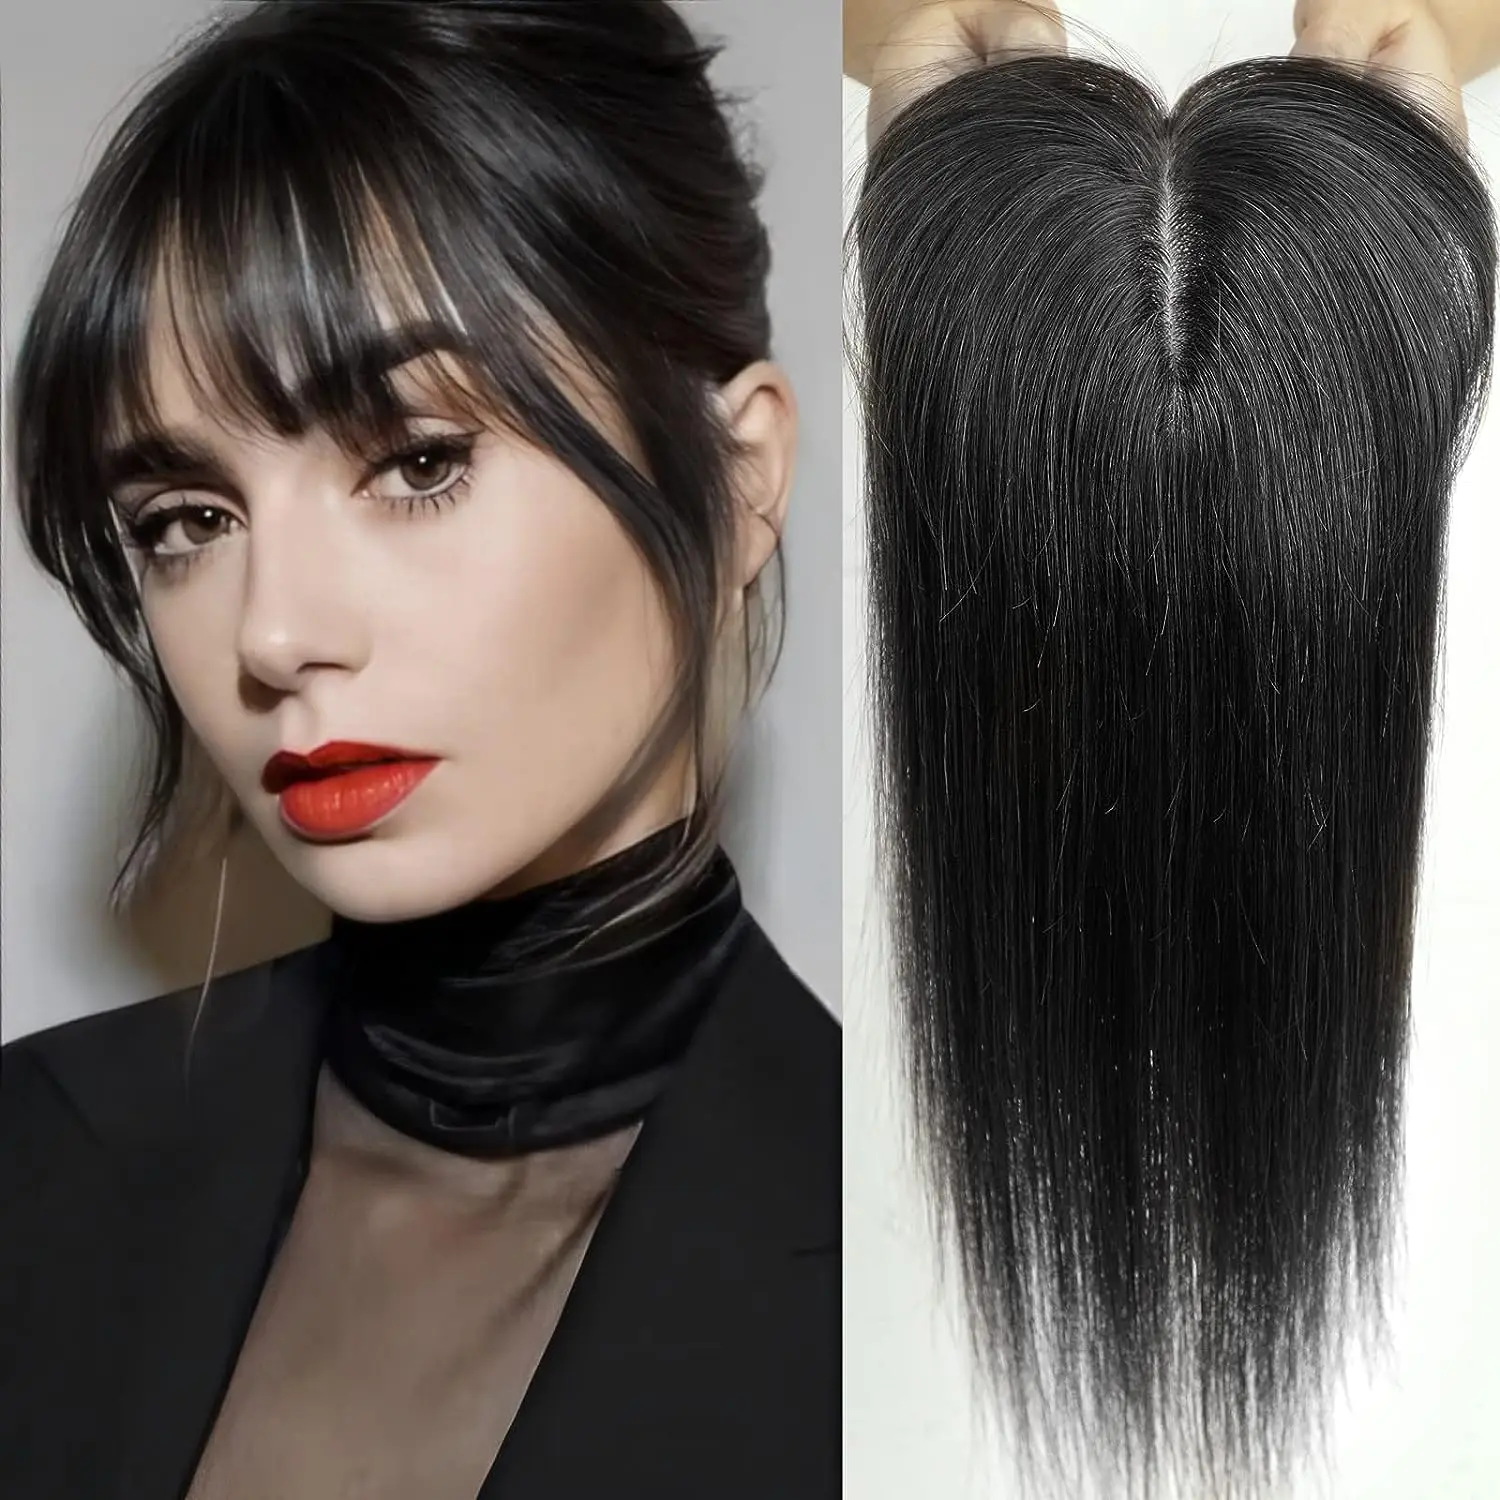 Brazilian Human Hair Toppers for Women Real Remy Hair 12x13/13x14 Straight Human Hair Topper Silk Base with Bangs Clip in Hair